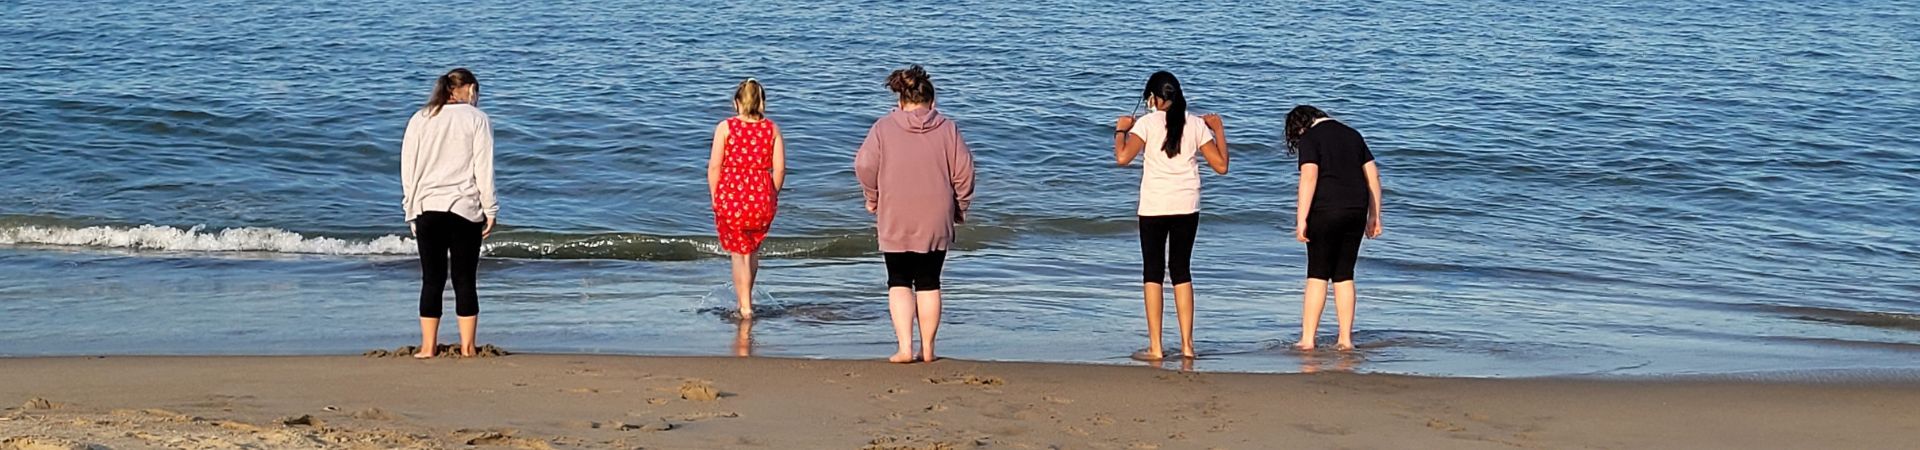  Girls from troop 60 standing near the ocean to make candles in the sand 